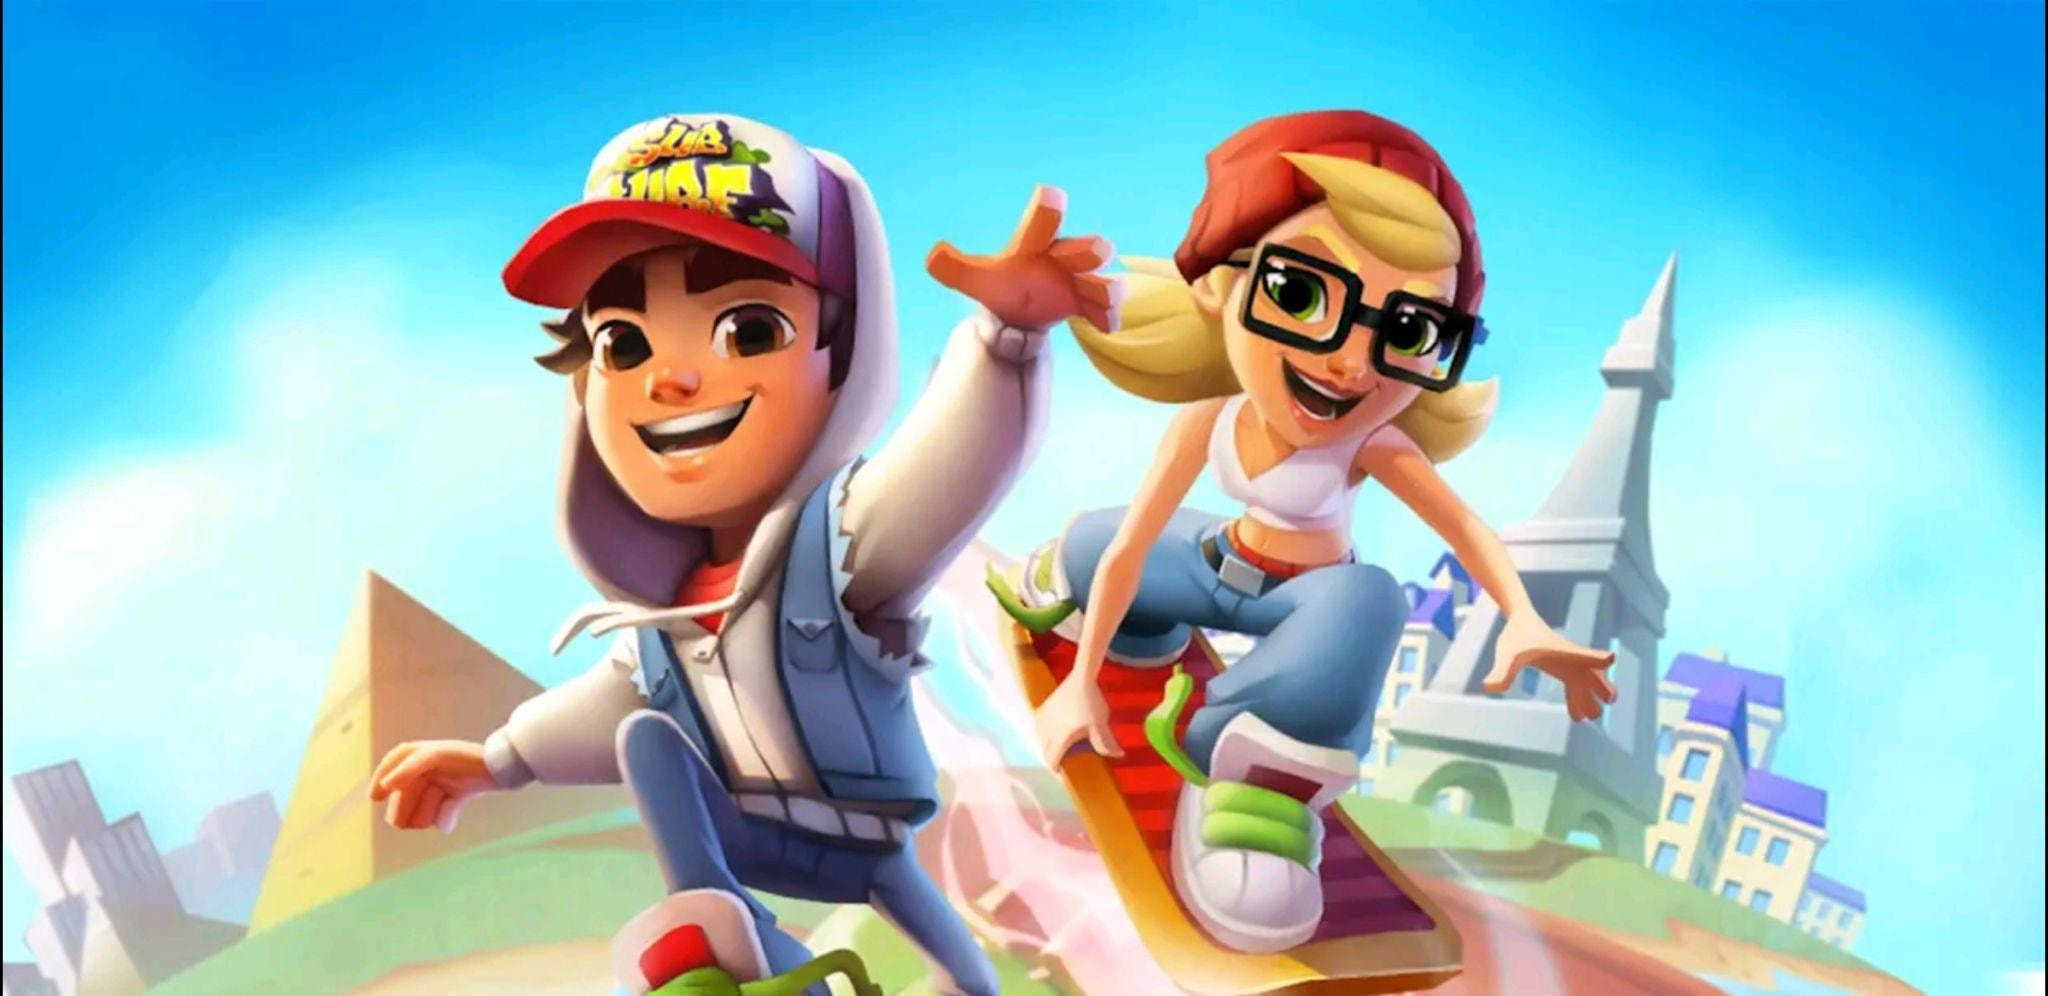 Subway Surfers Mexico City Character, Board, and Outfit Unlocking